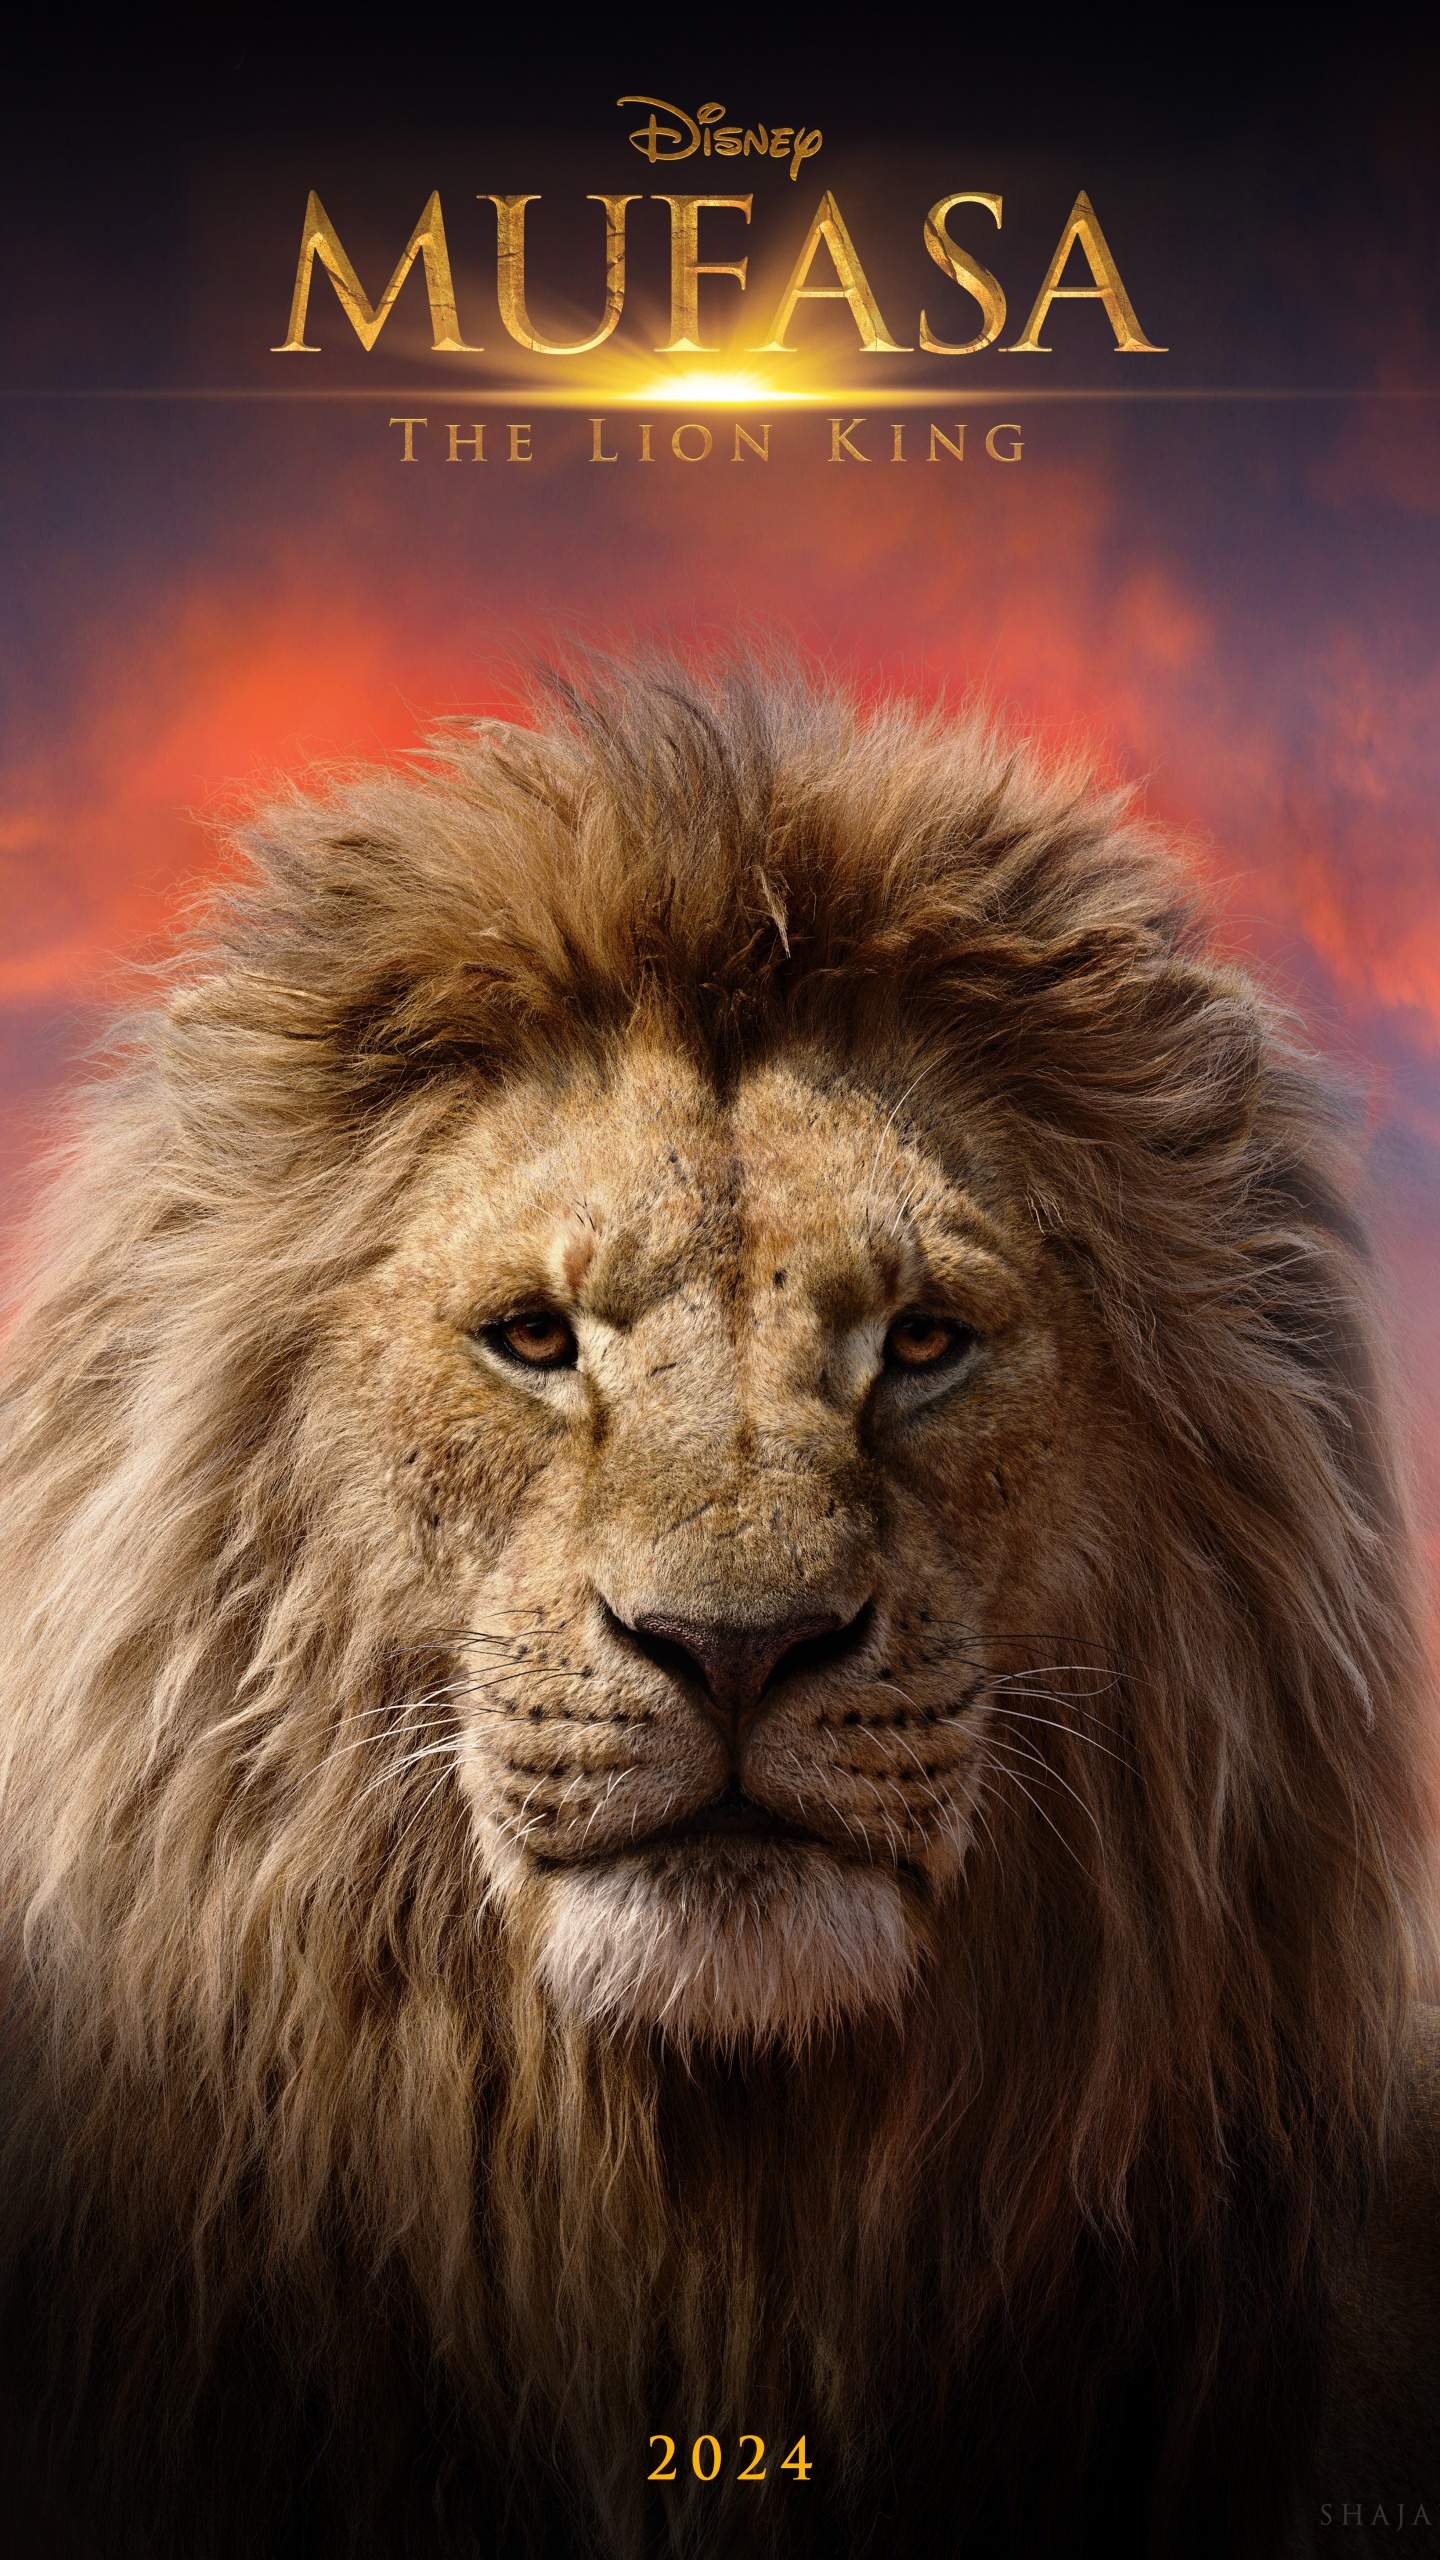 Mufasa The Lion King 5K Wallpaper for iPhone